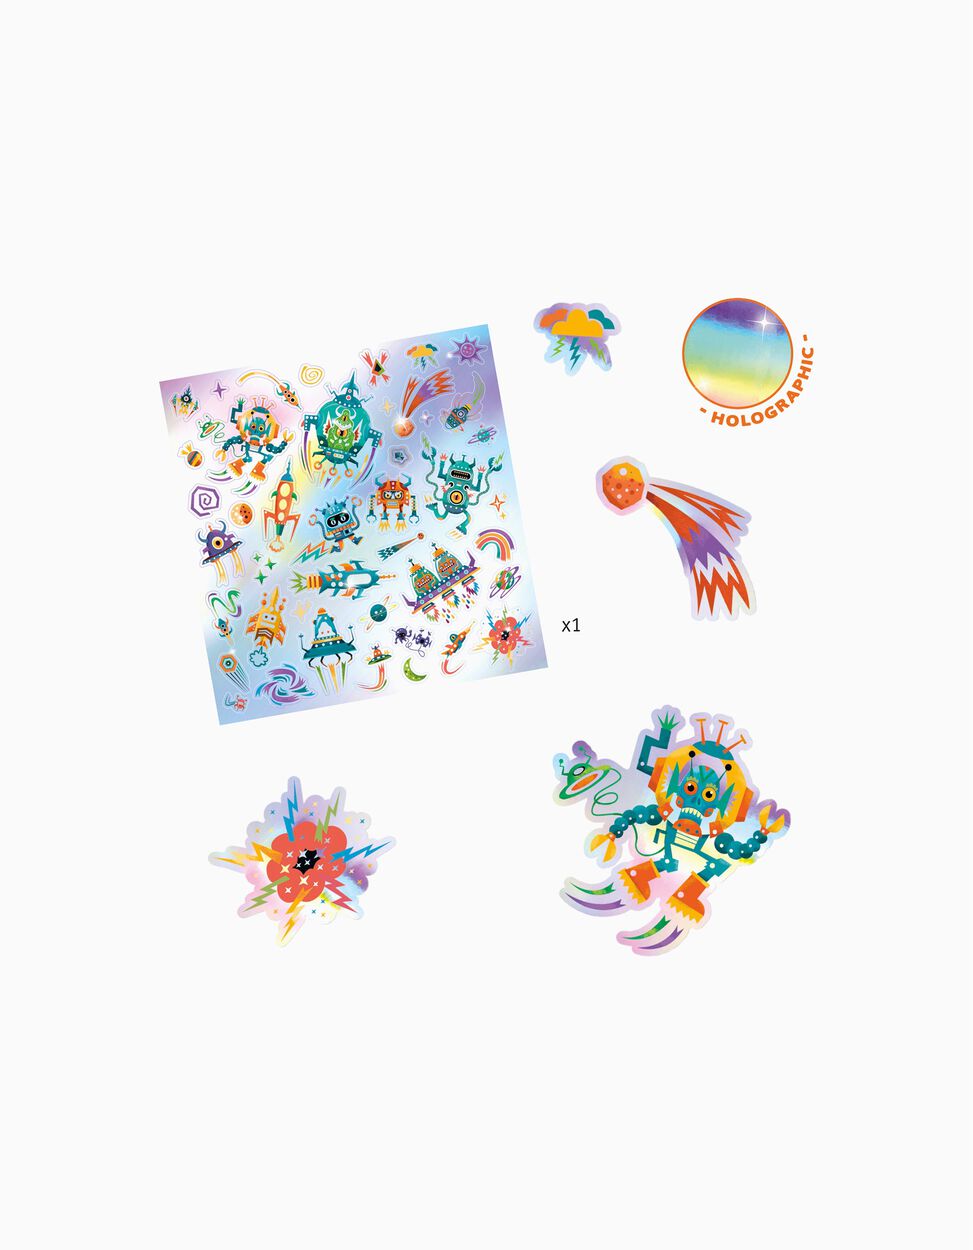 Intergalactic holographic Stickers, 30 pcs, by Djeco